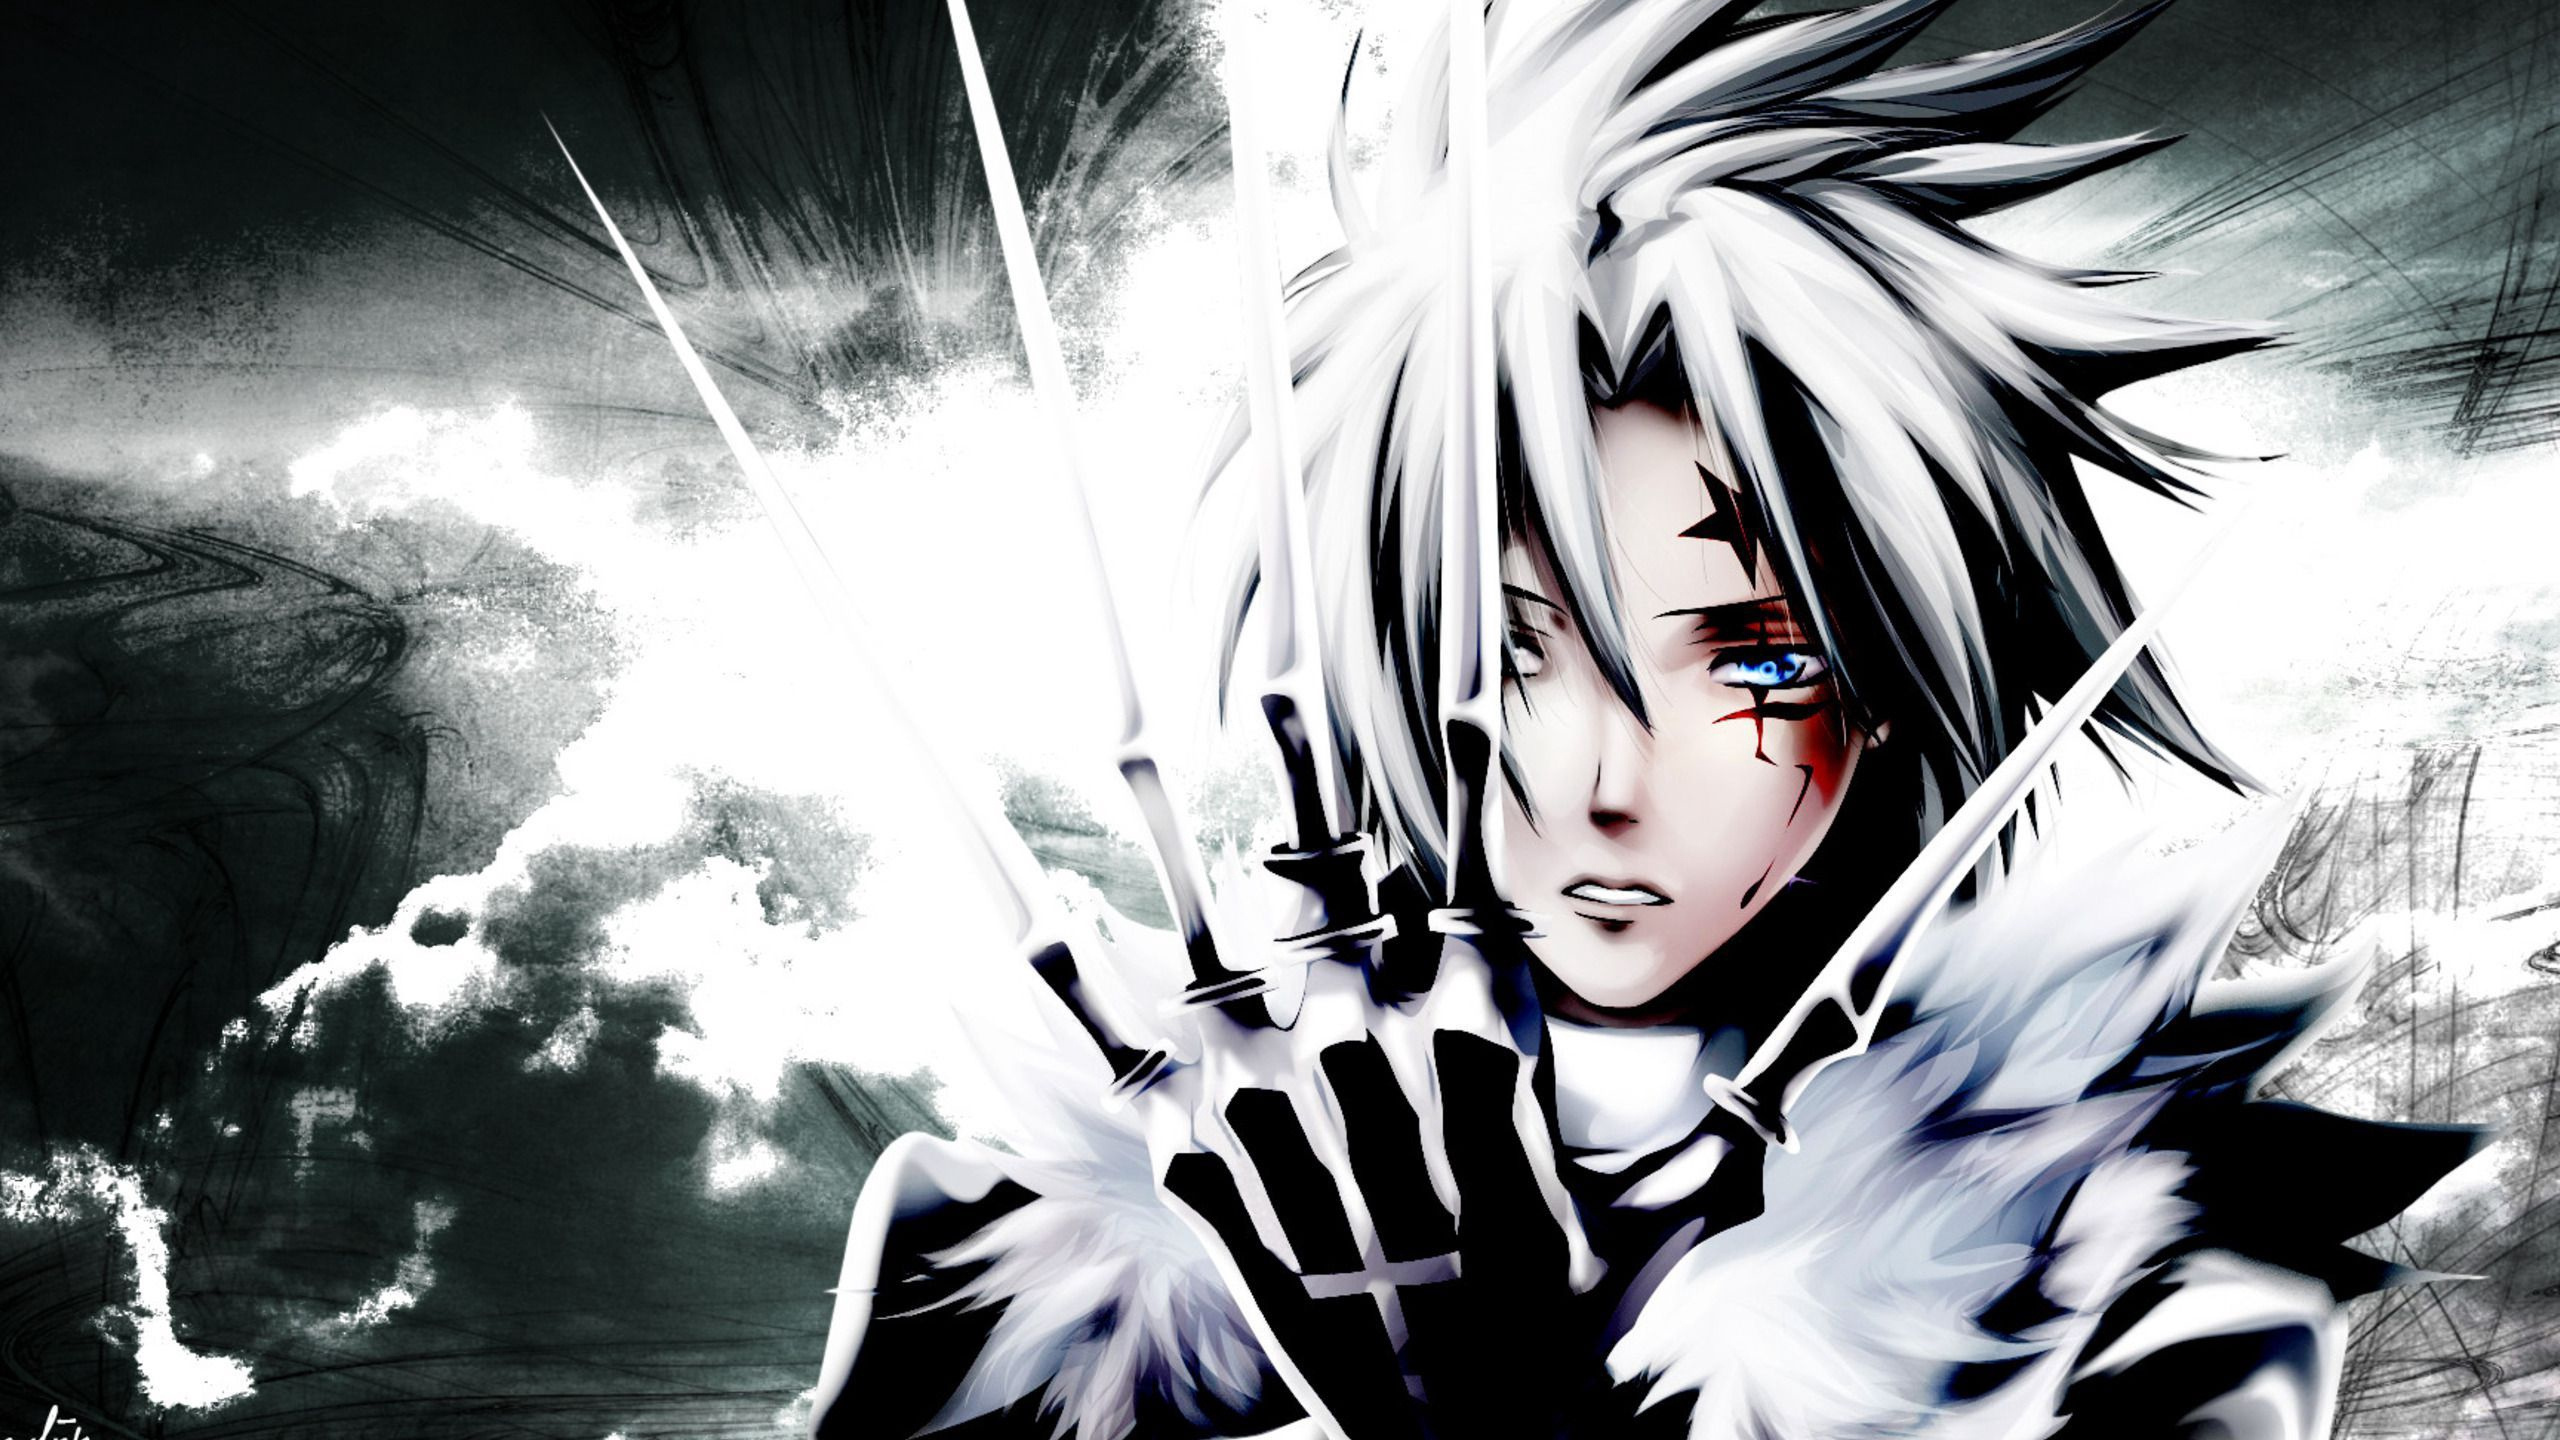 Personnage D'anime Masculin Aux Cheveux Noirs. Wallpaper in 2560x1440 Resolution